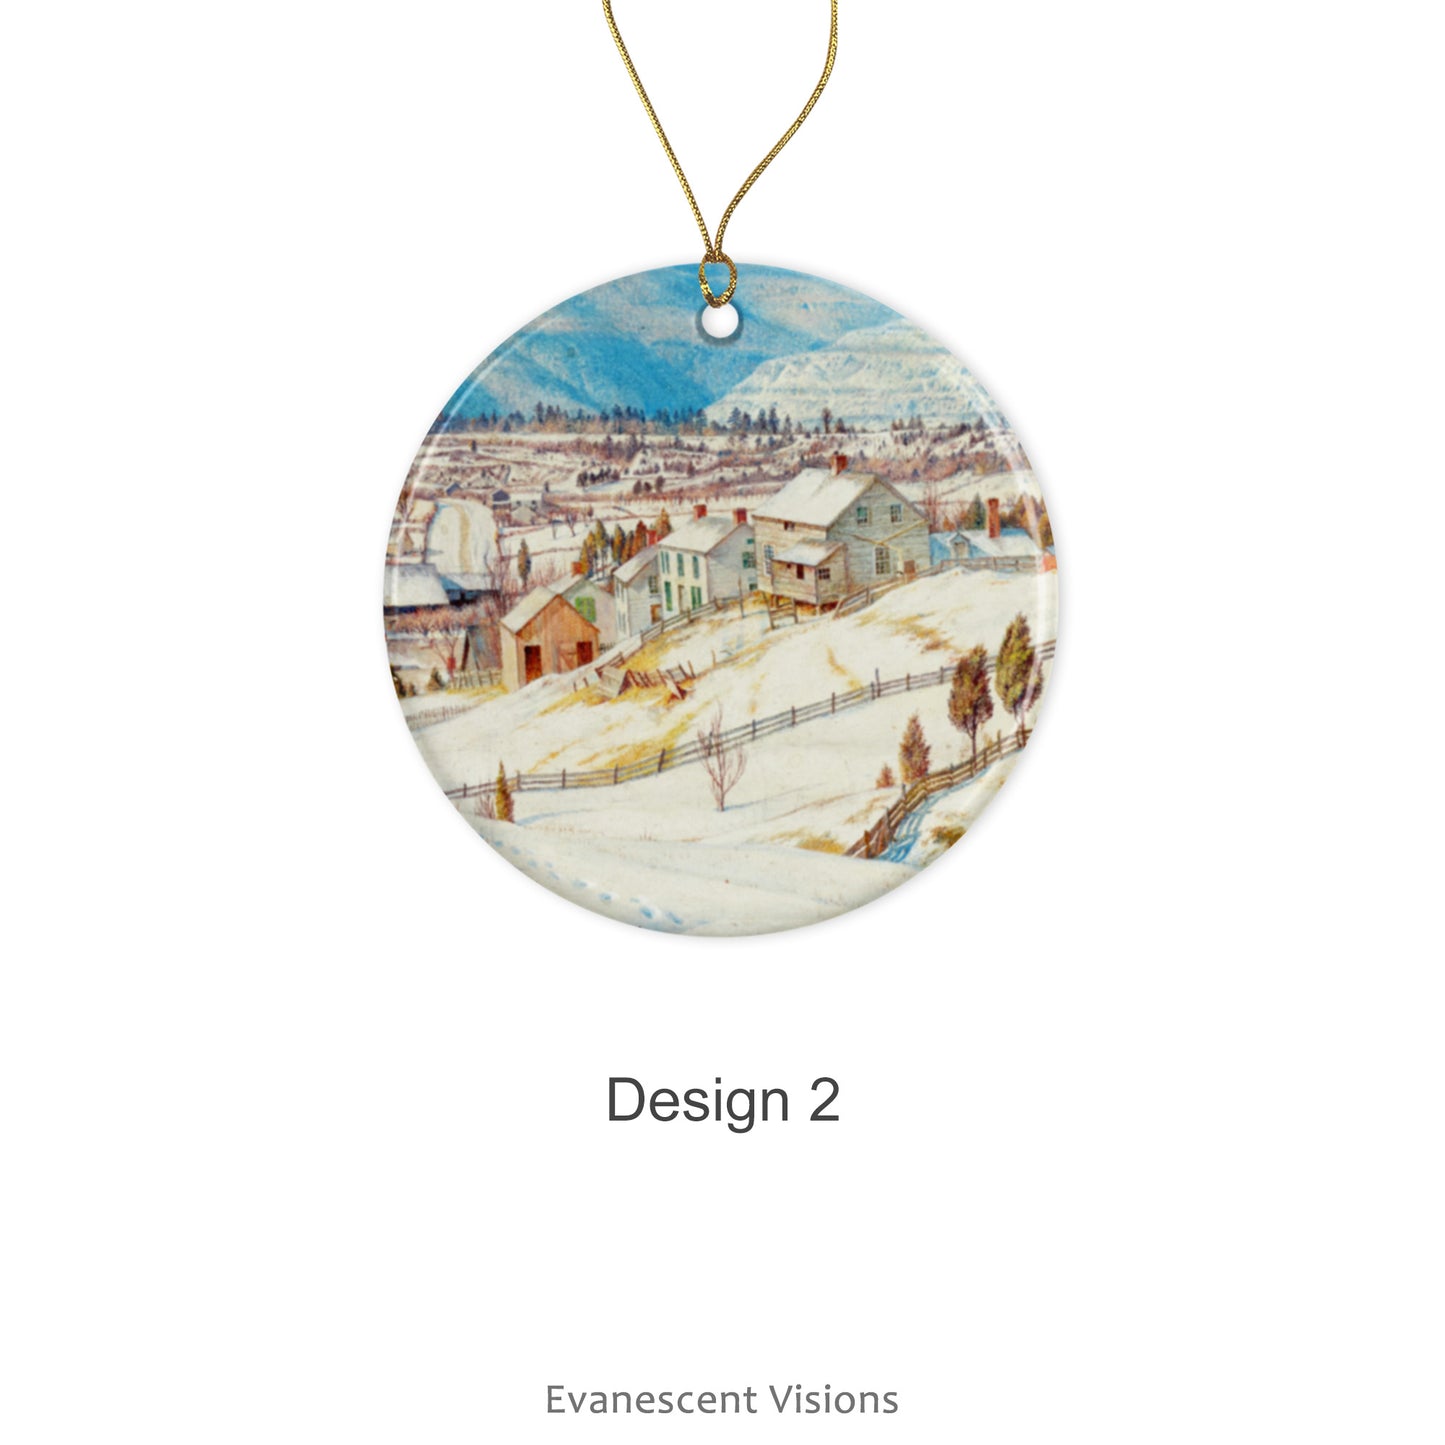 Design option 2 for the Ceramic Christmas Ornaments with Snowy Winter Landscape painting 'High Peak and Round Top (Catskill) in Winter' by artist Charles Herbert Moore 